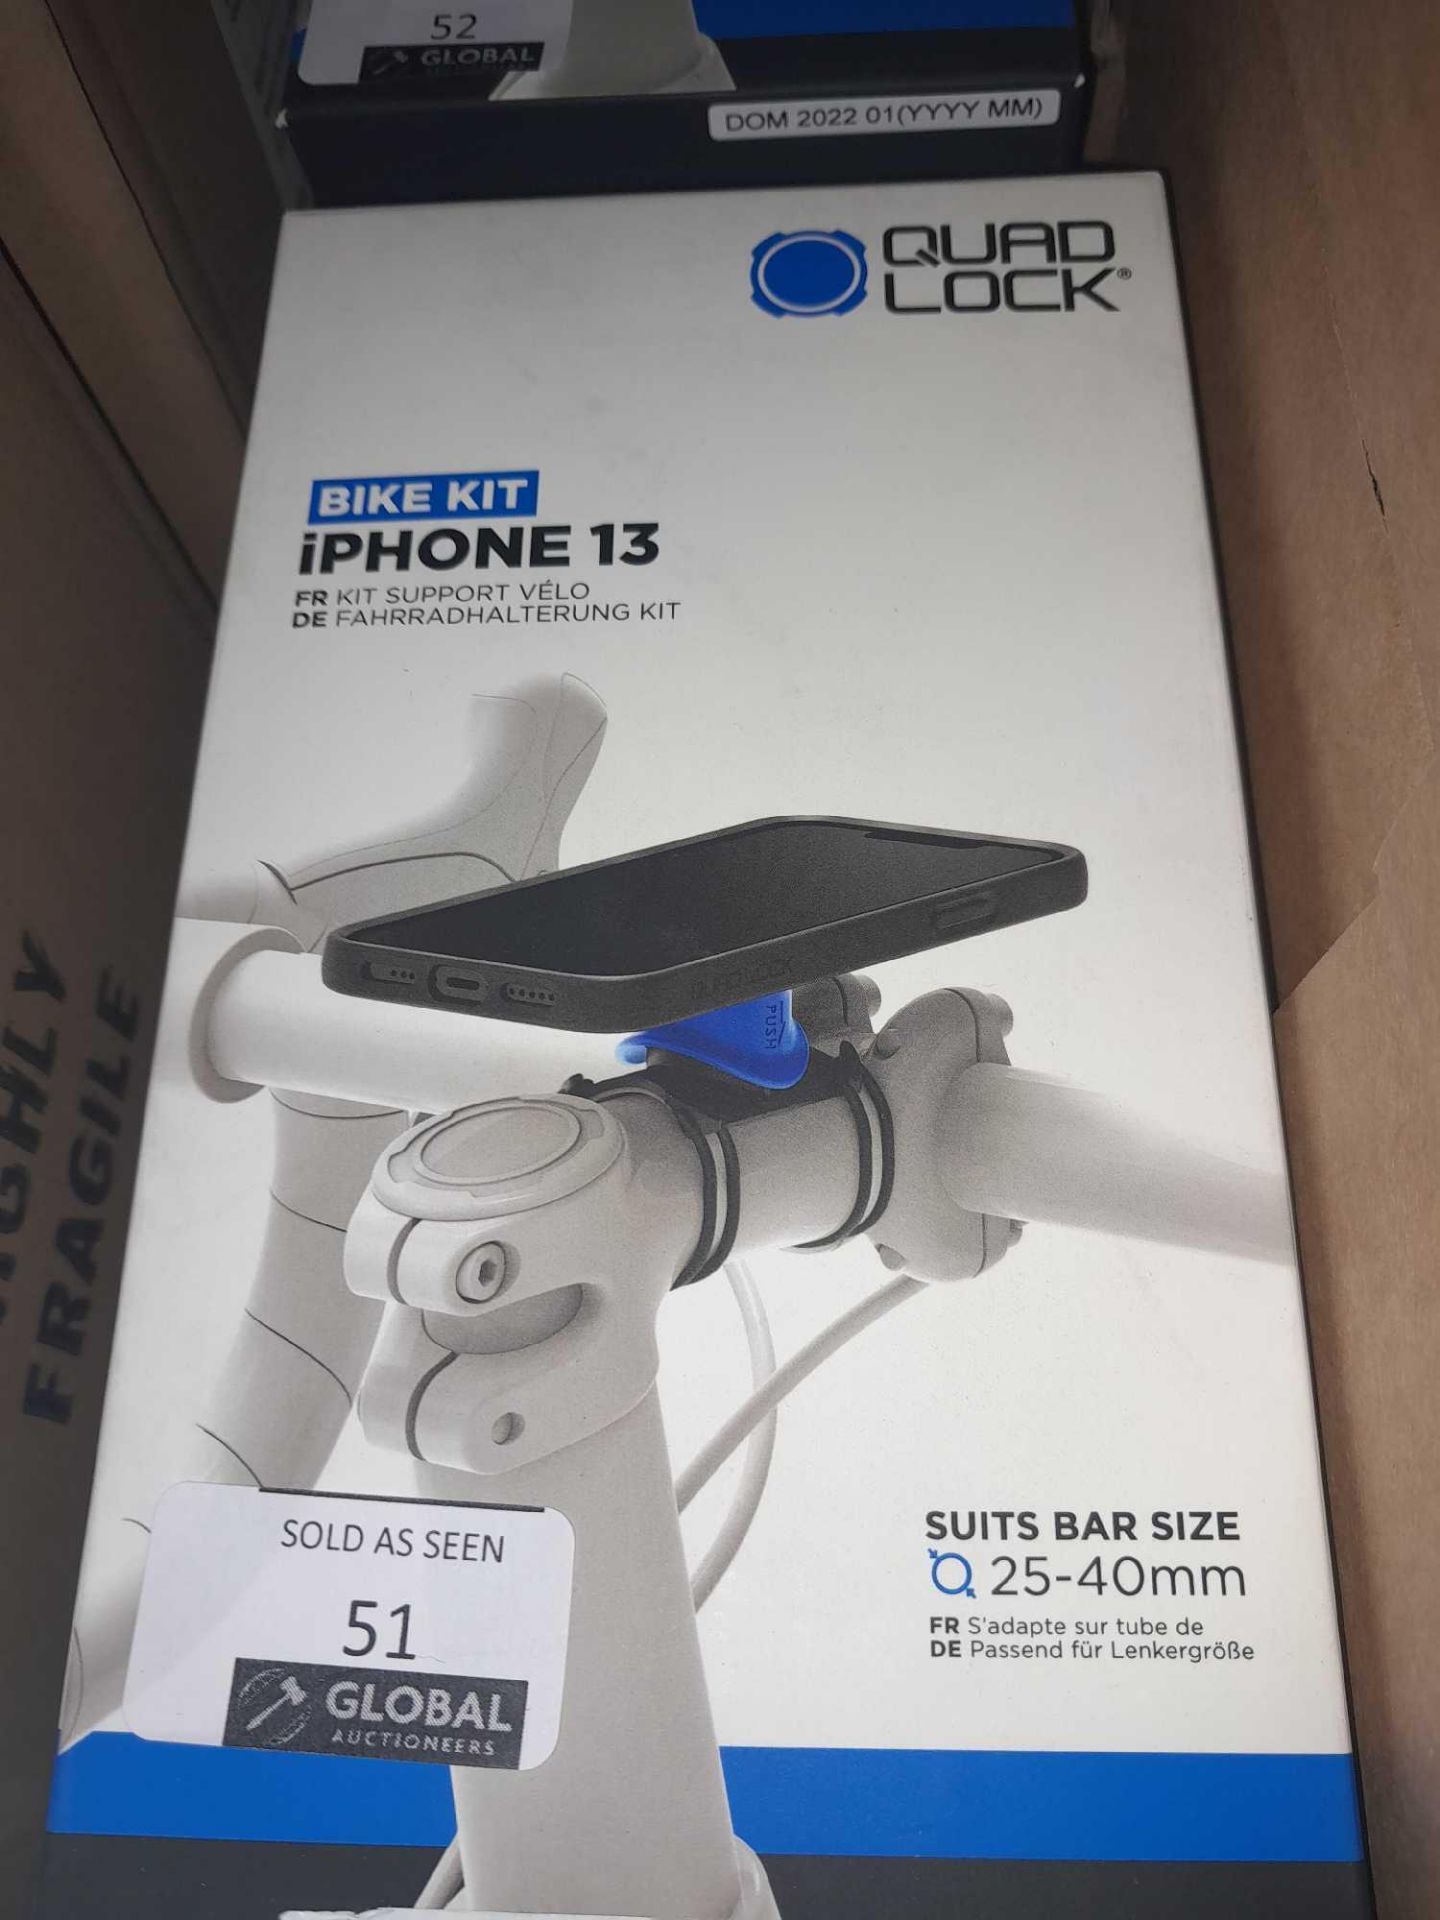 RRPÂ£250 Lot To Contain 5 Boxed Quad Lock iPhone 13 Bicycle Kit - Image 2 of 2